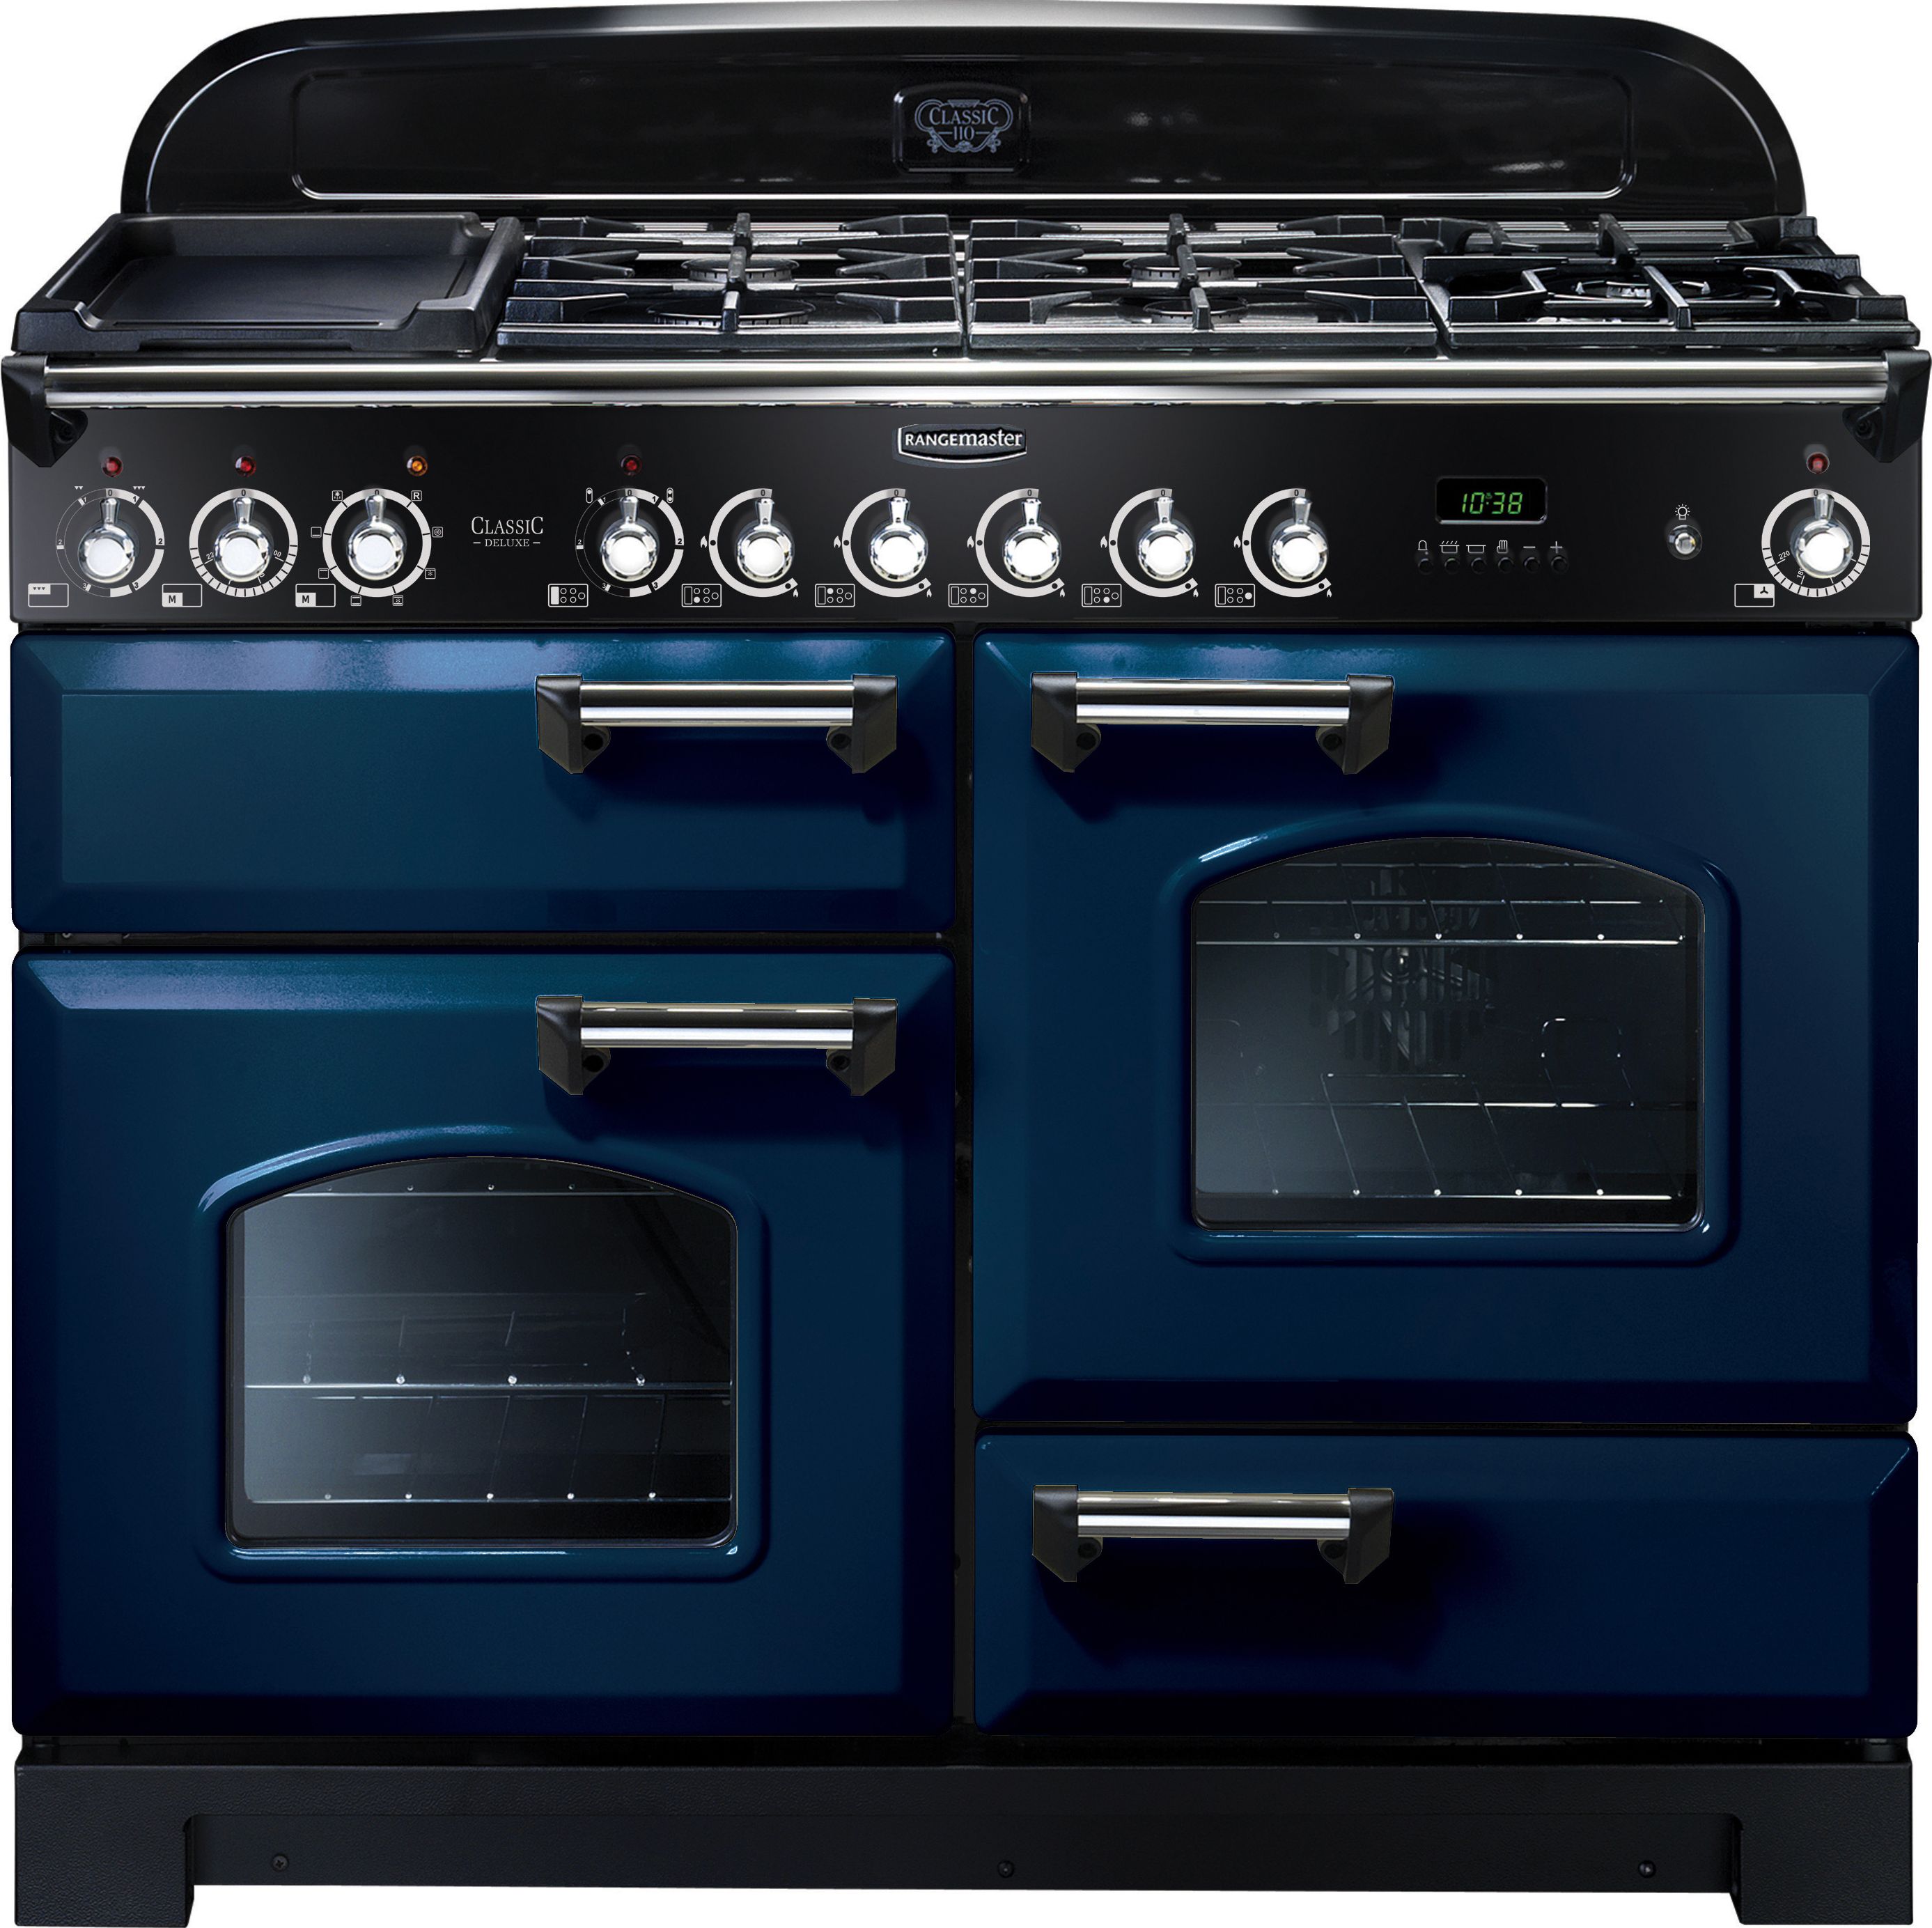 Rangemaster Classic Deluxe CDL110DFFRB/C 110cm Dual Fuel Range Cooker - Regal Blue / Chrome - A/A Rated, Blue